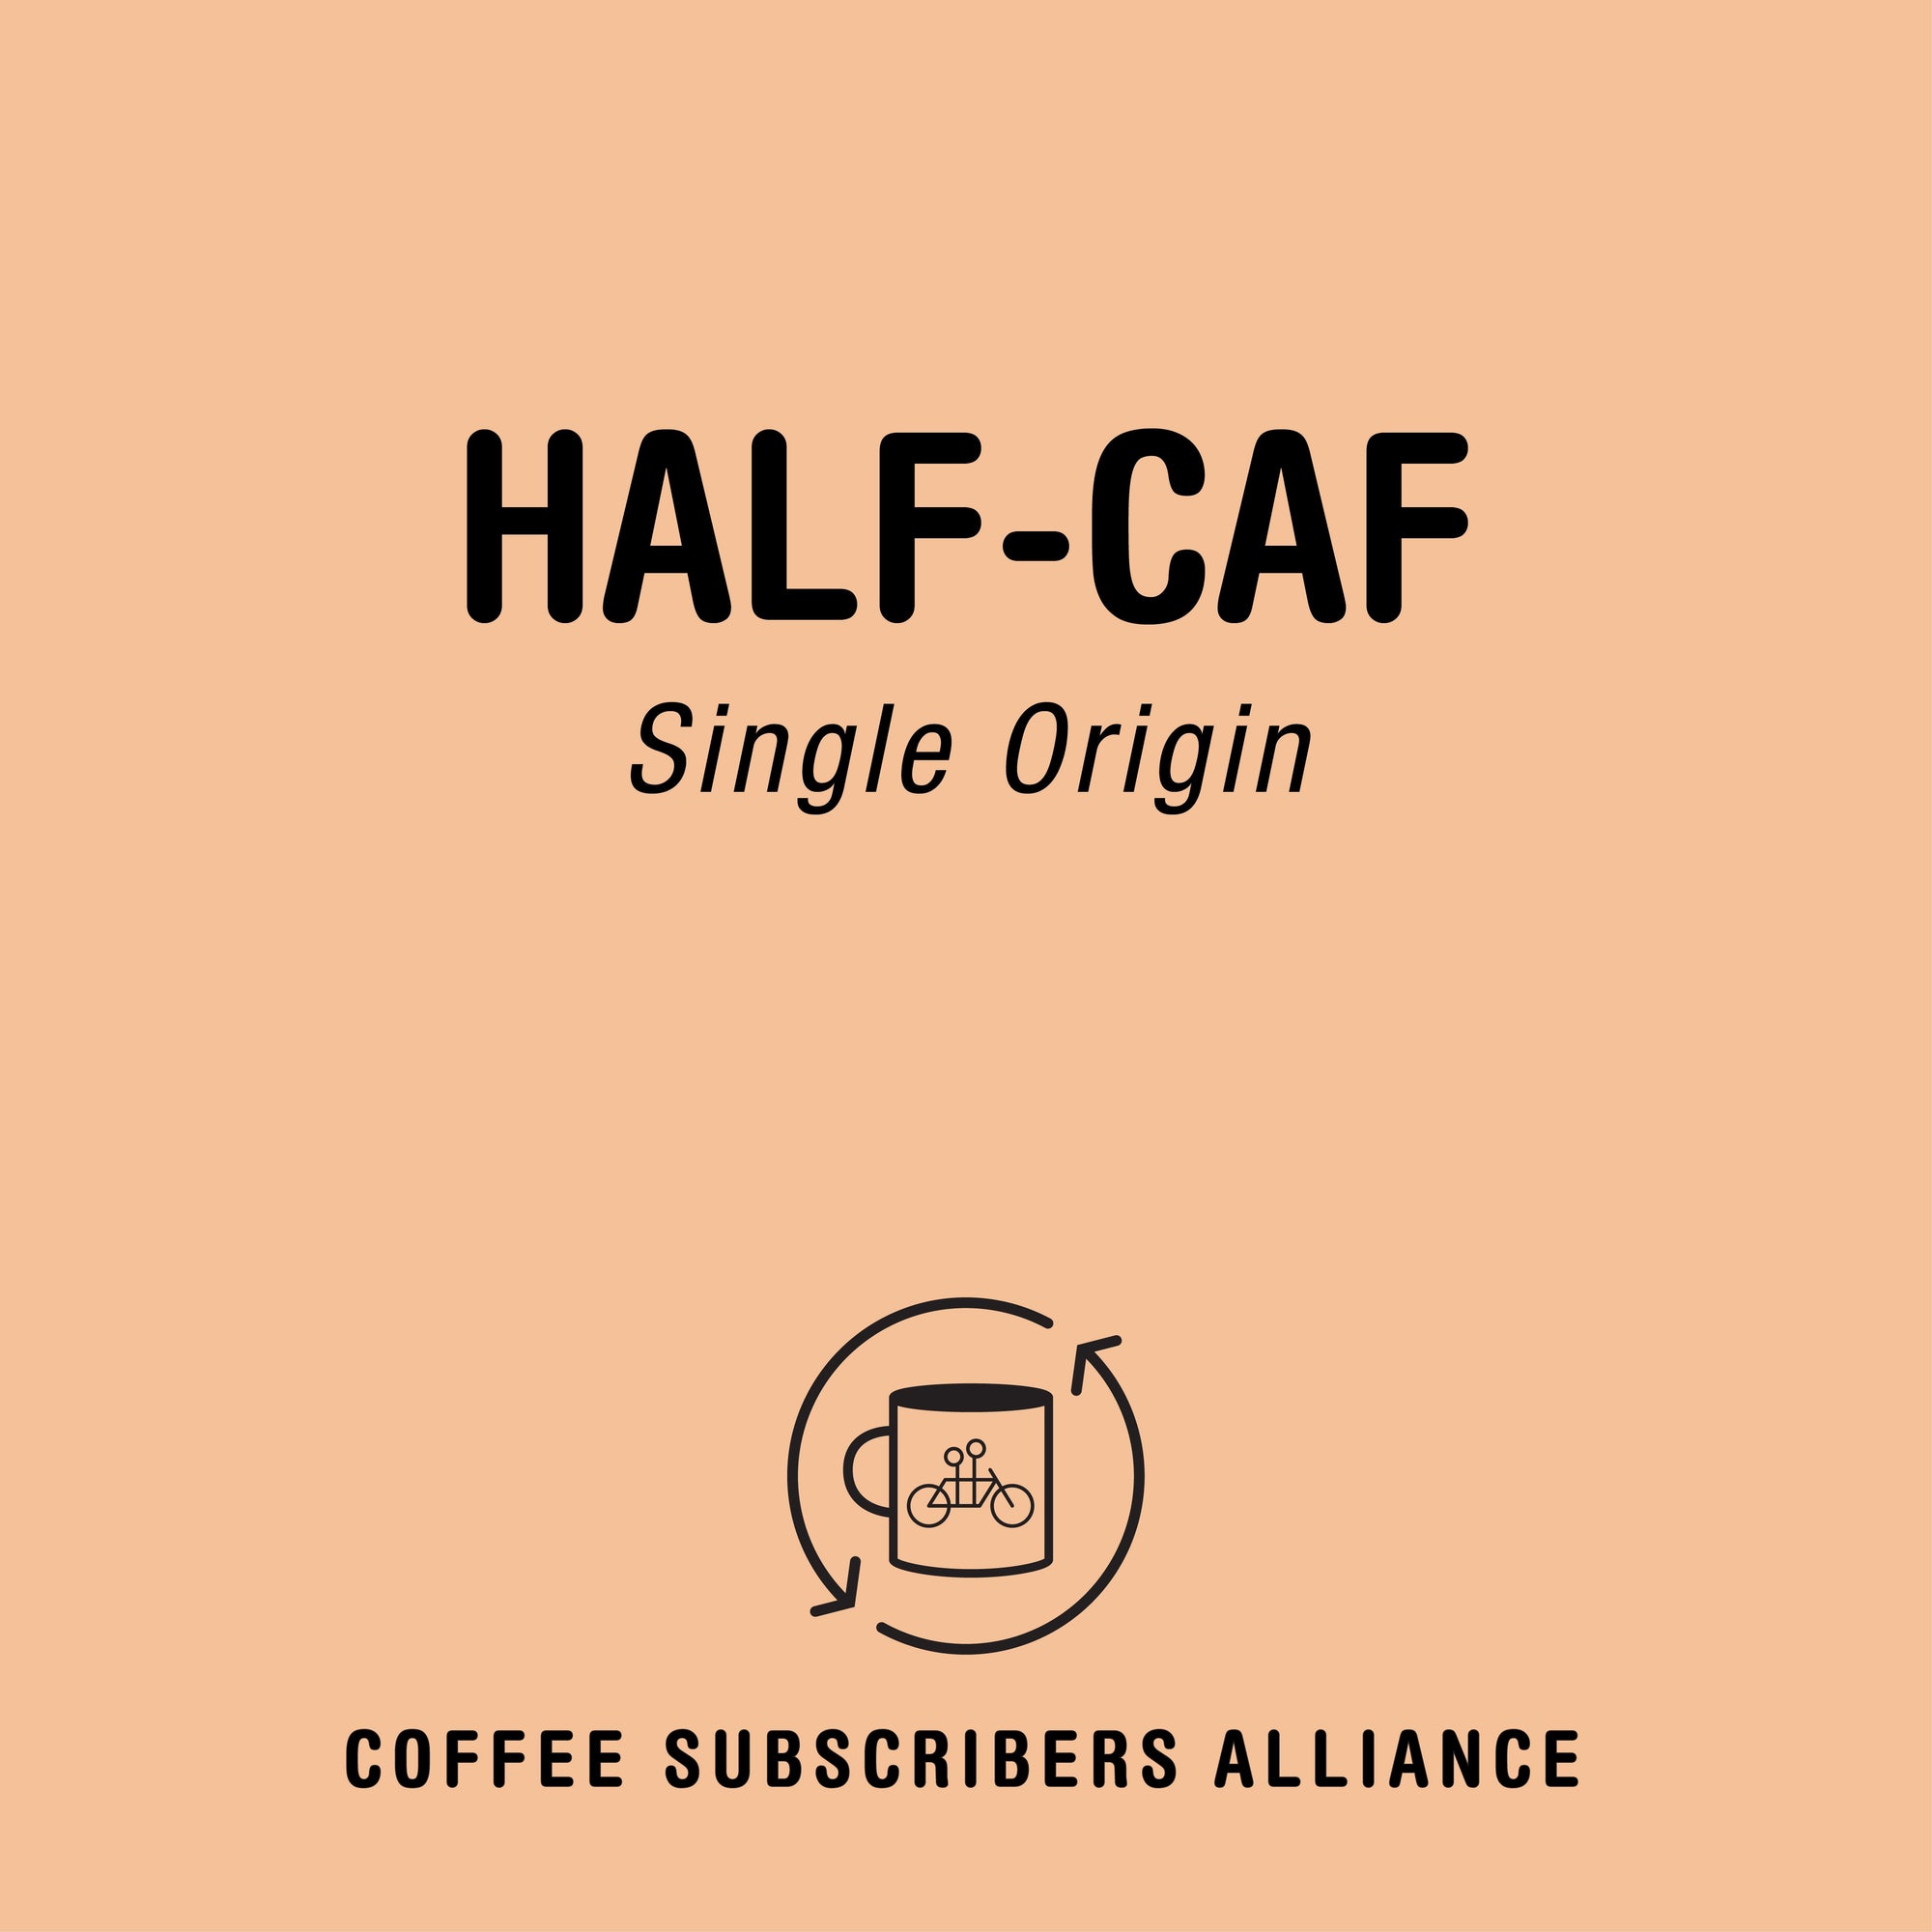 A Tandem minimalist graphic with text "Half-Caf Subscription Gift 4 Weeks x 6" above a logo featuring a coffee cup encircled with the text "coffee subscription alliance" on a soft peach background.